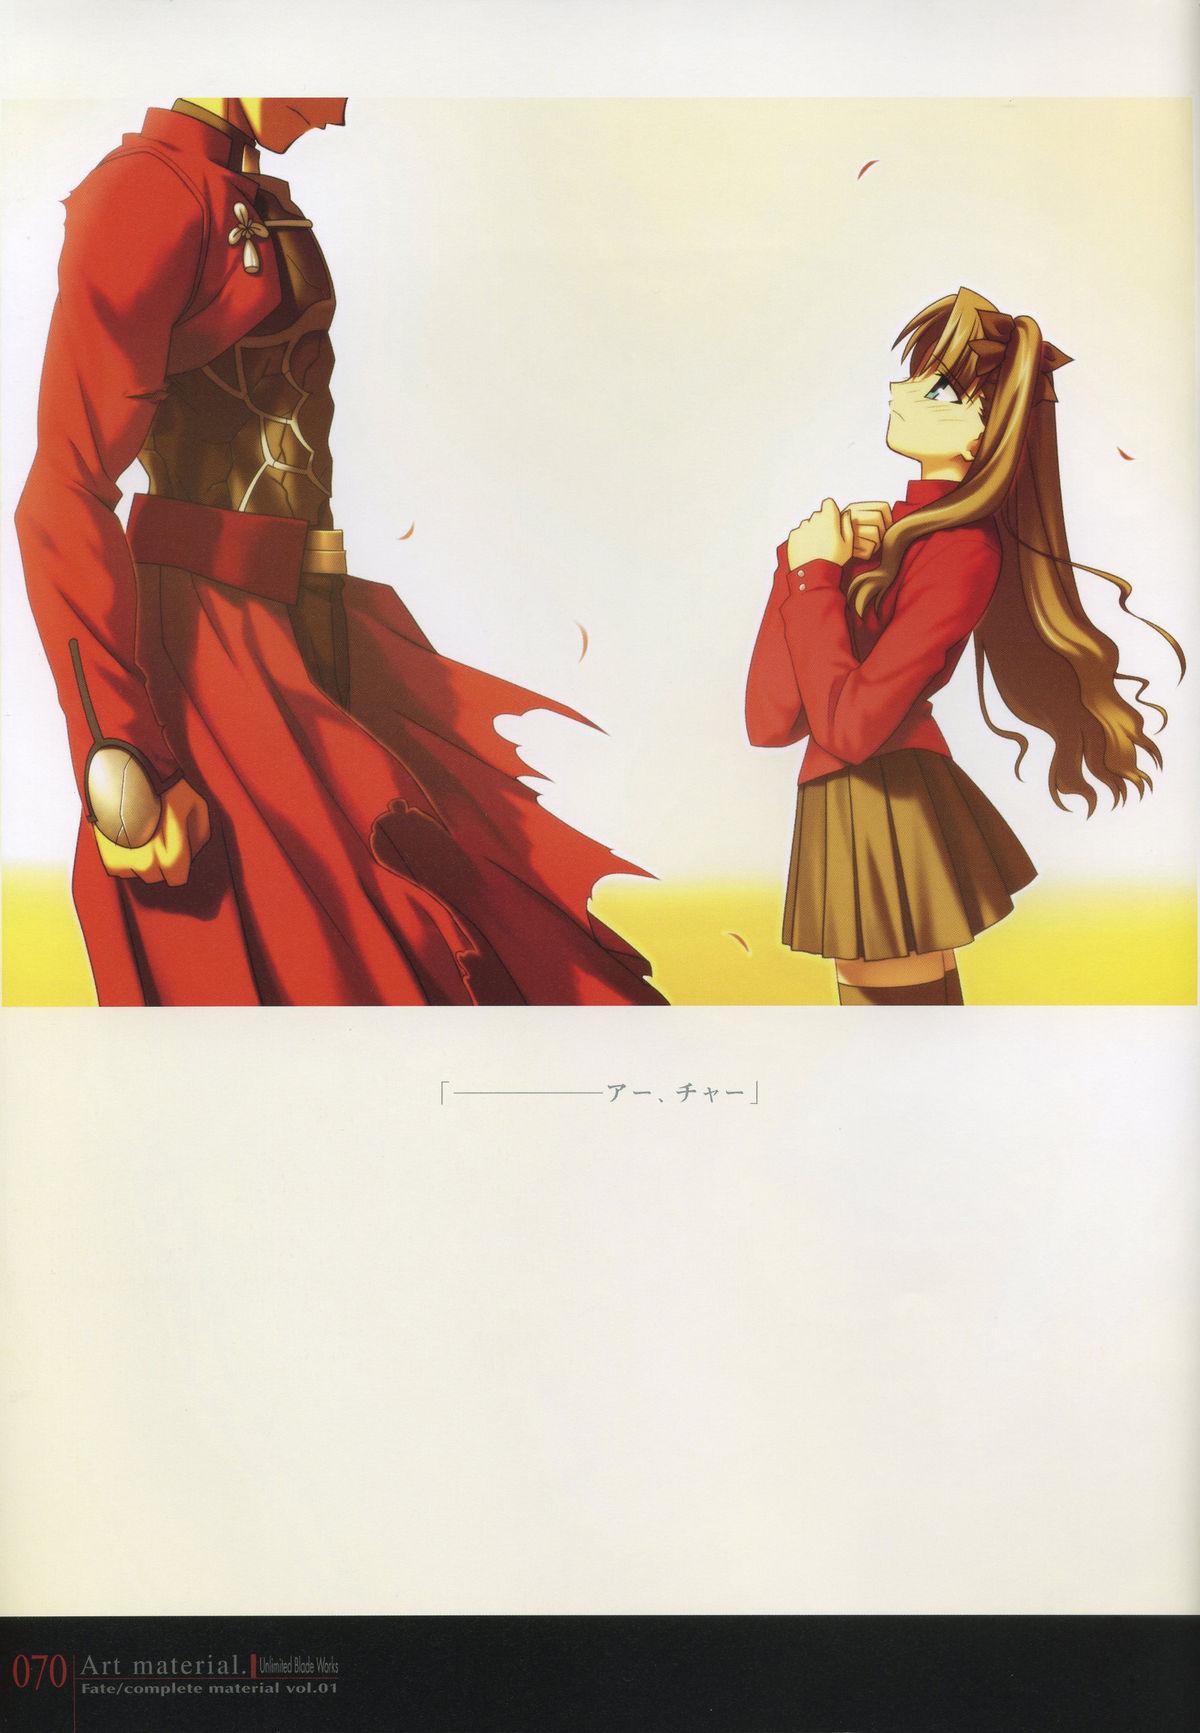 Fate/complete material I - Art material. 74